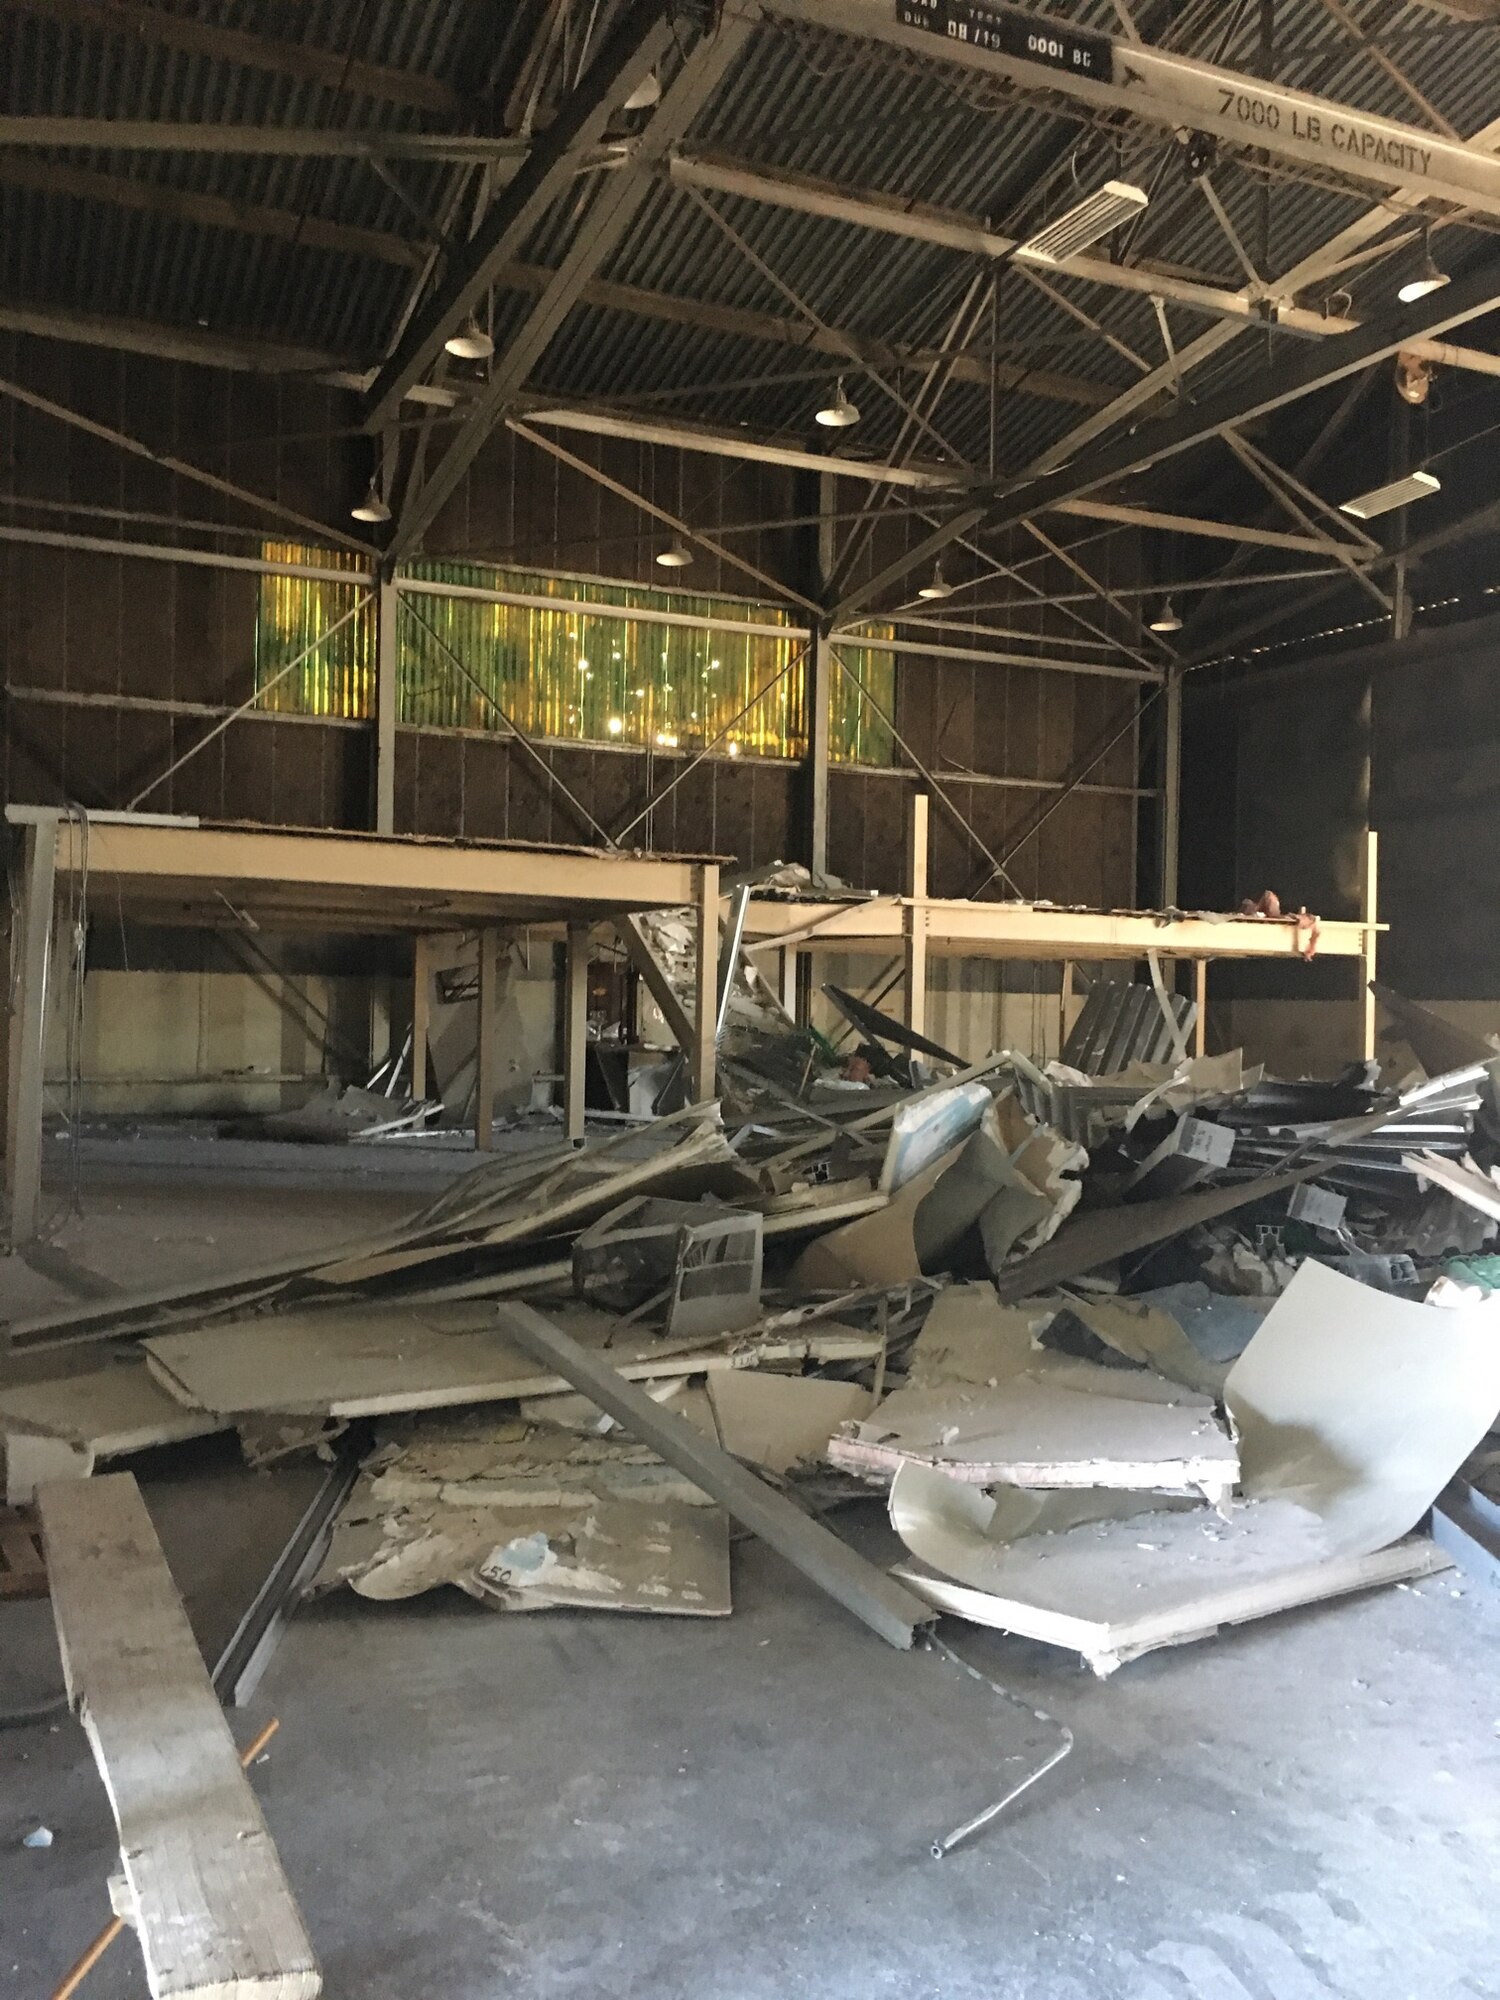 Debris from dismantled structures cover the floor of Building 844 at Travis Air Force Base, California, July 2, 2019. The refurbished hangar houses the new Nose Dock Gym, facilitated through existing base funds, equipment donations and volunteer work by the 60th Mission Support Group. (U.S. Air Force courtesy photo)